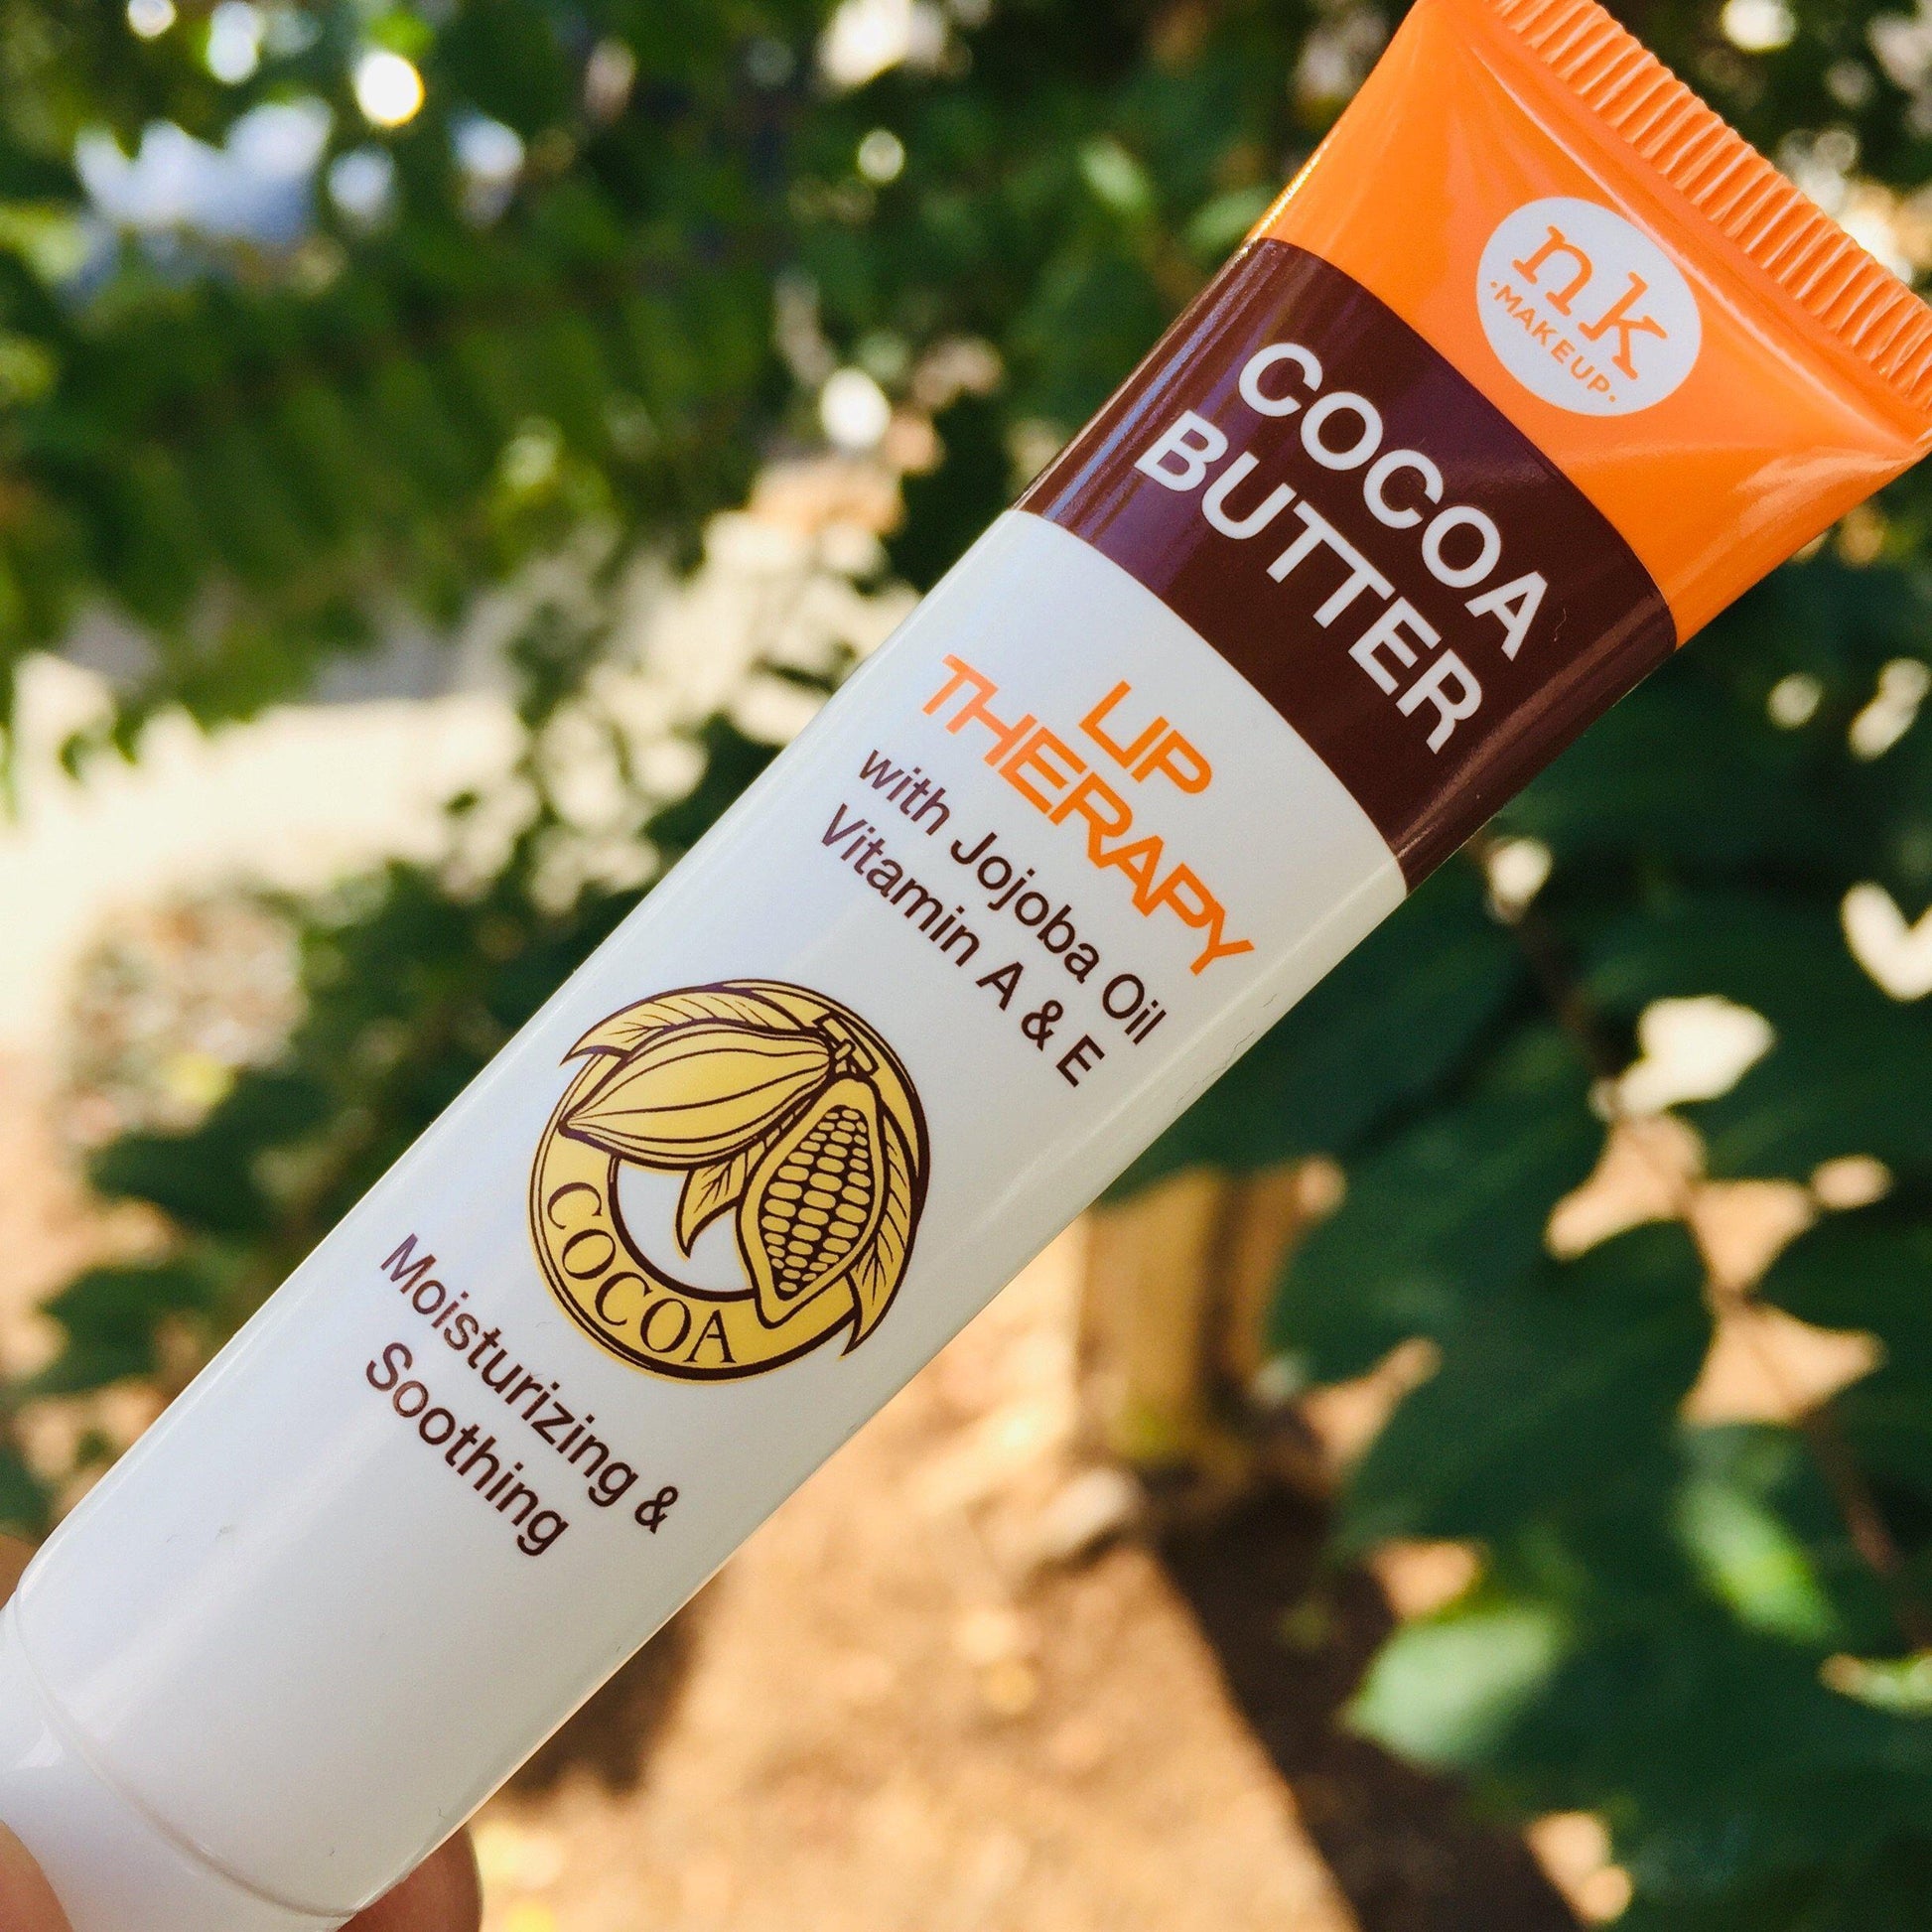 Nicka K Cocoa Butter Lip Therapy